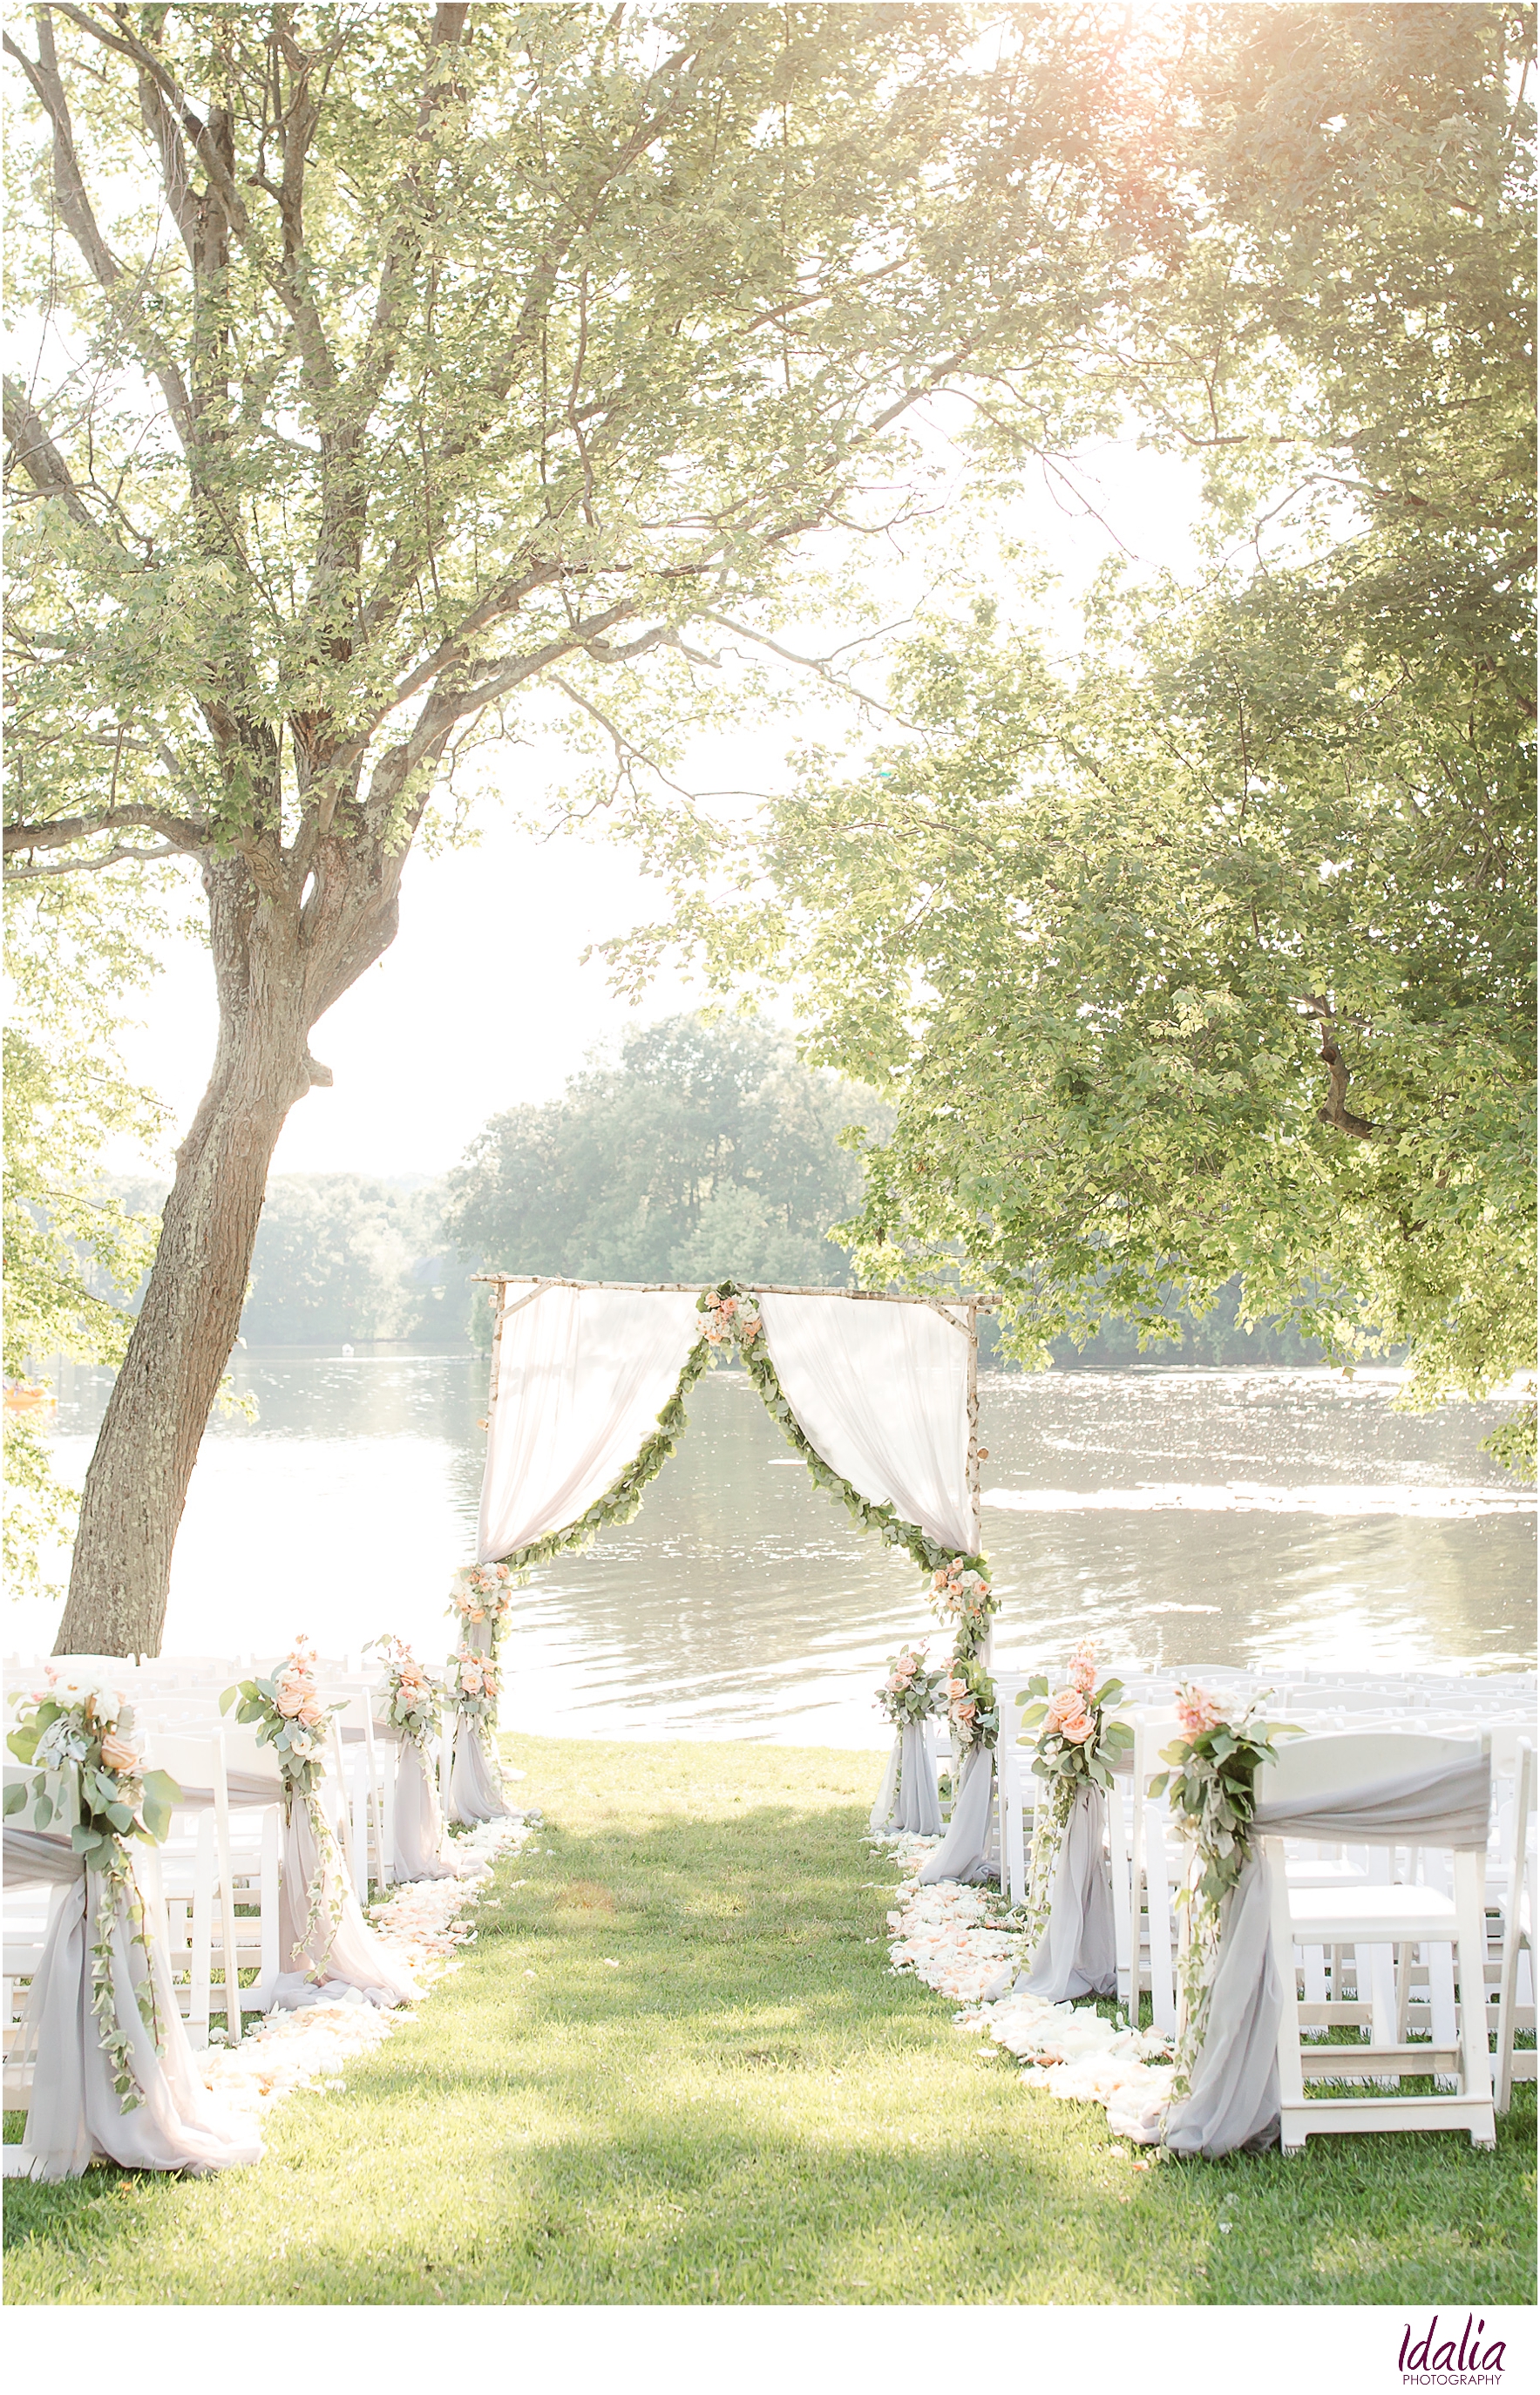 Dreaming of a serene location for your outdoor NJ wedding? Click to view Indian Trail Club, an outdoor venue in Franklin Lakes, NJ | #njweddingvenue #indiantrailclub